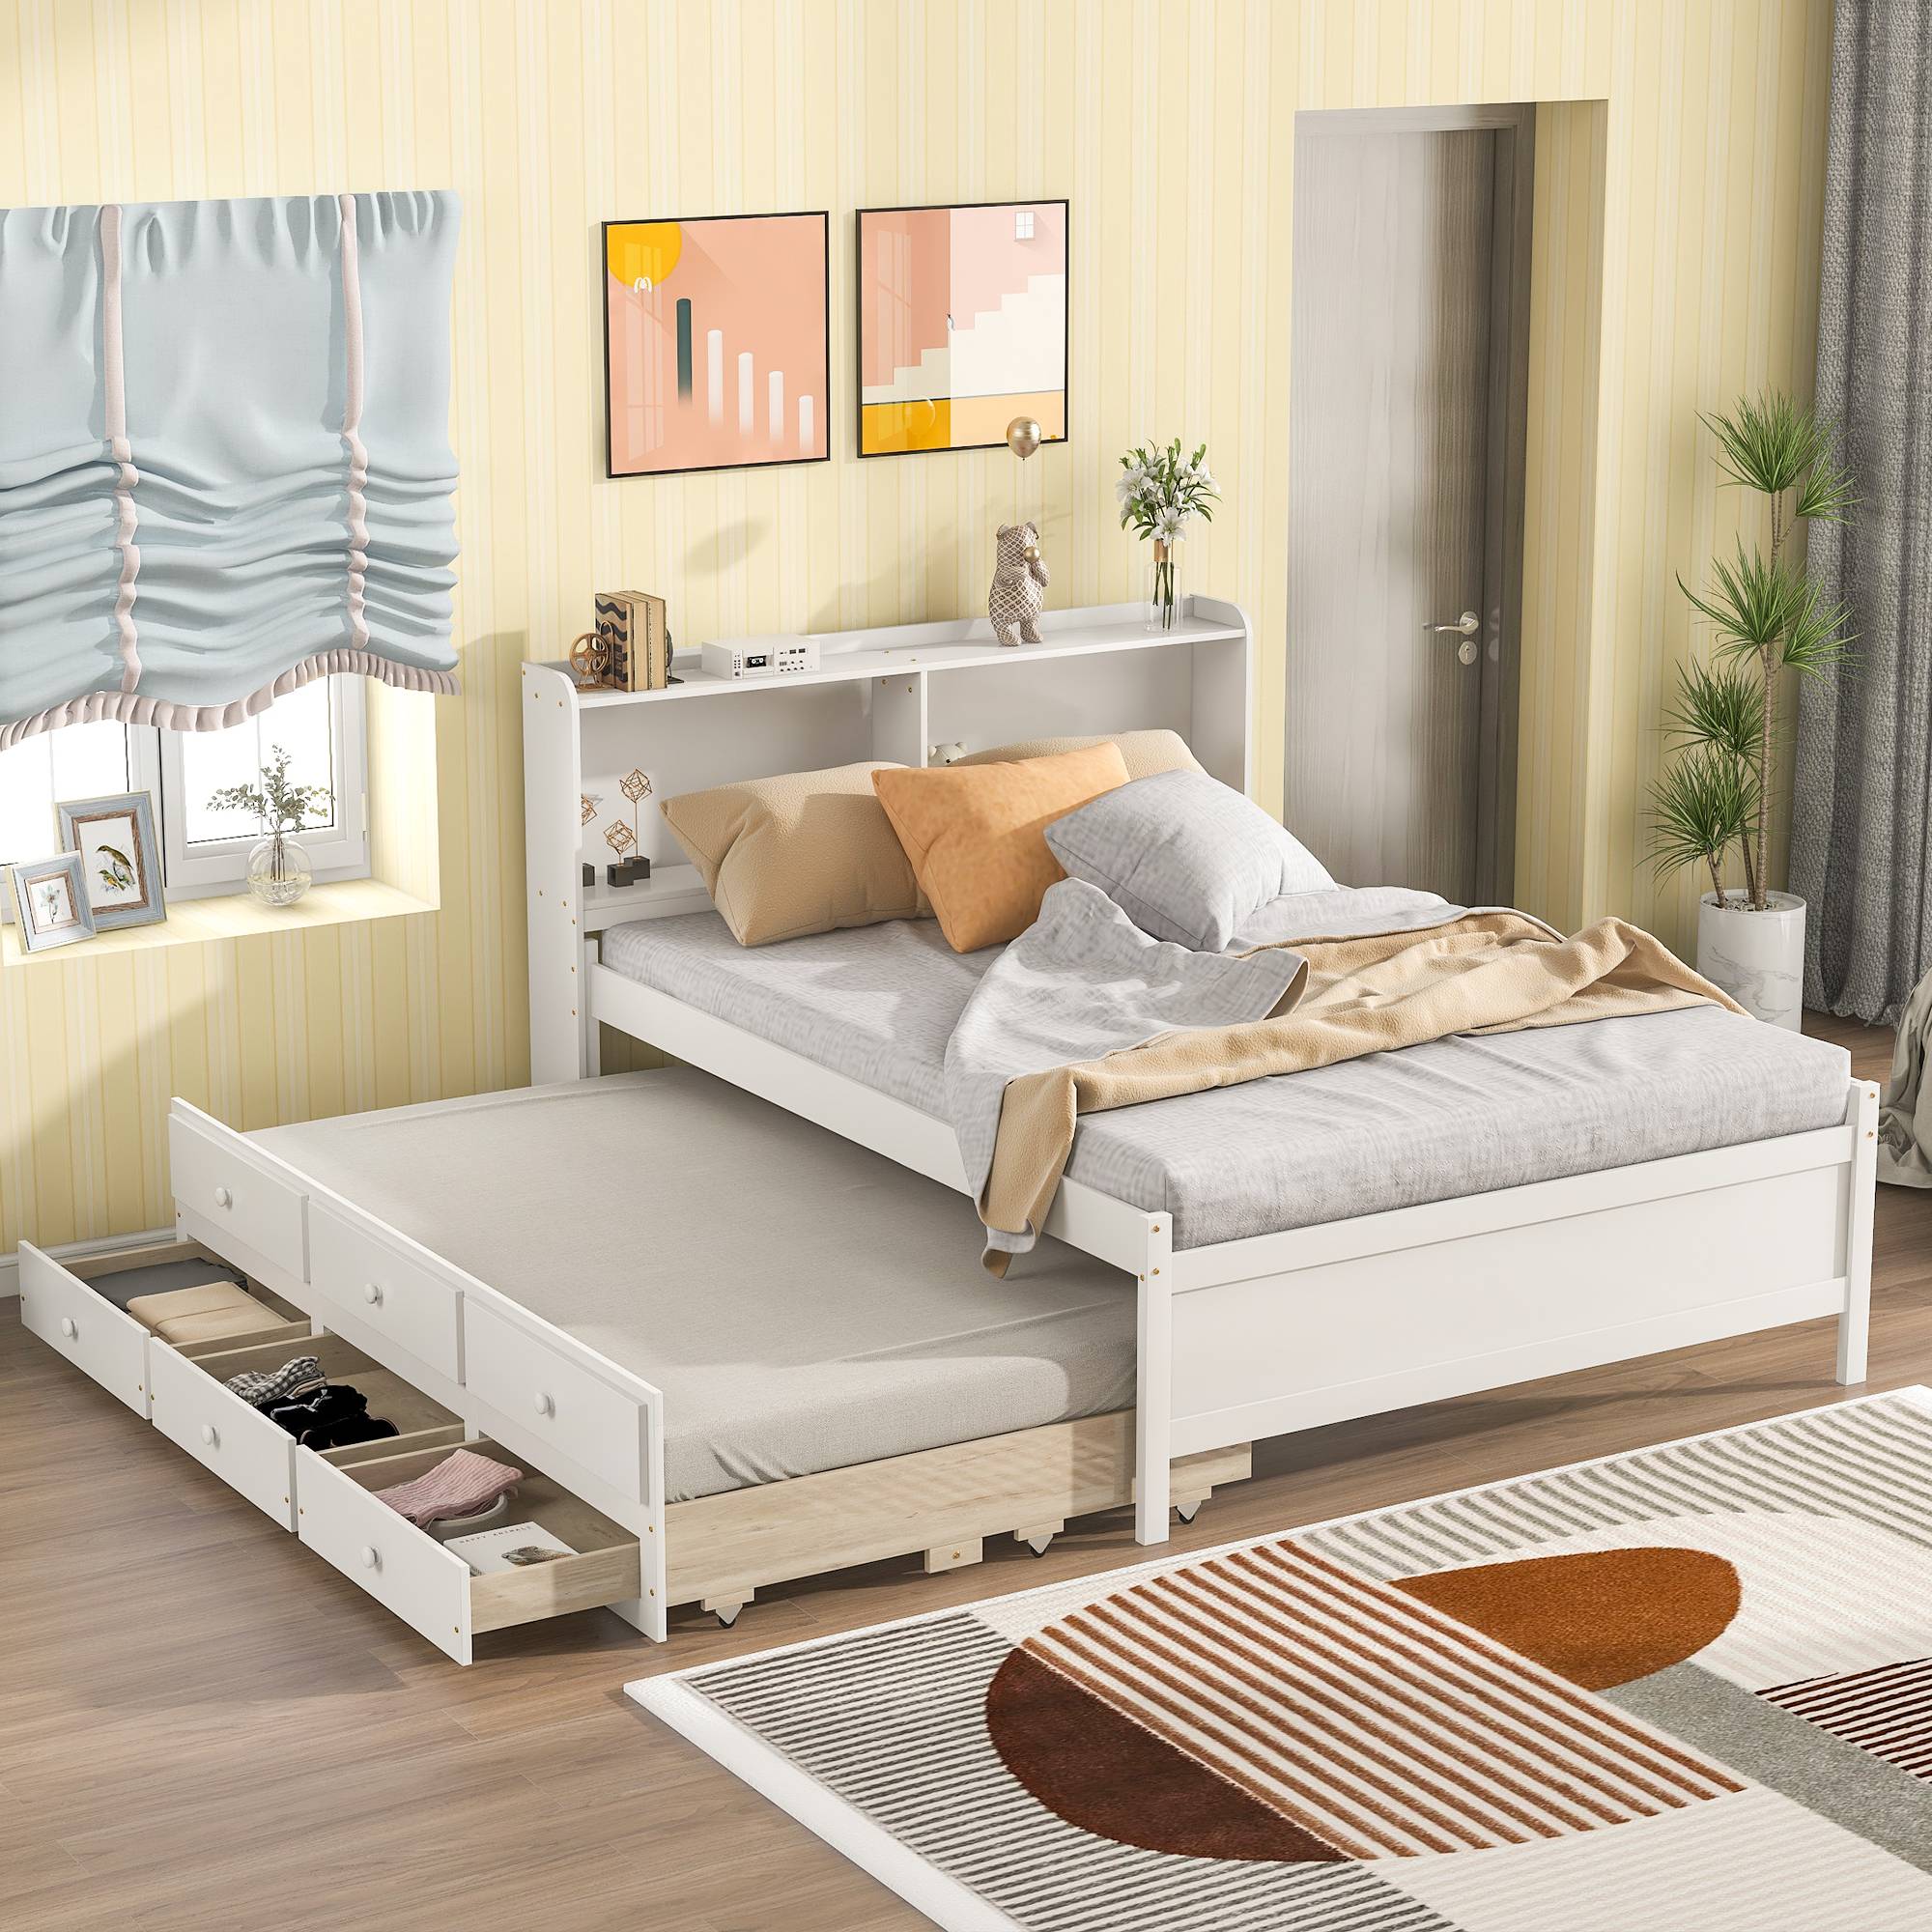 Yiekholo White Full Wood Platform Bed with Storage in the Beds ...